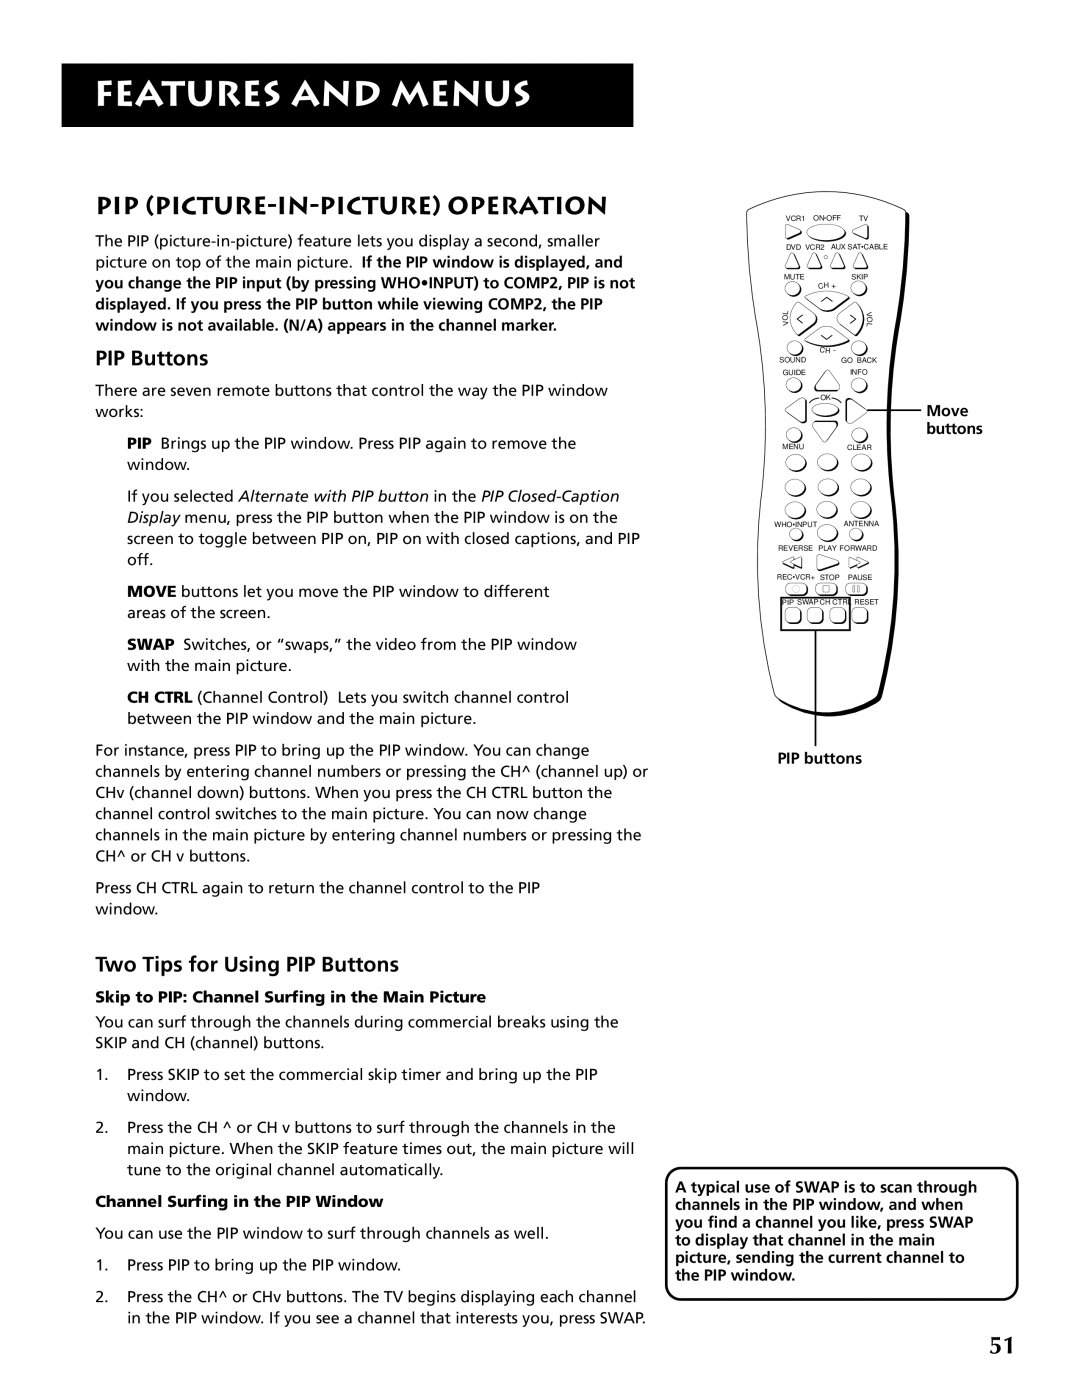 RCA F32691 manual Pip Picture-In-Picture Operation, Two Tips for Using PIP Buttons, Features And Menus, Move, buttons 